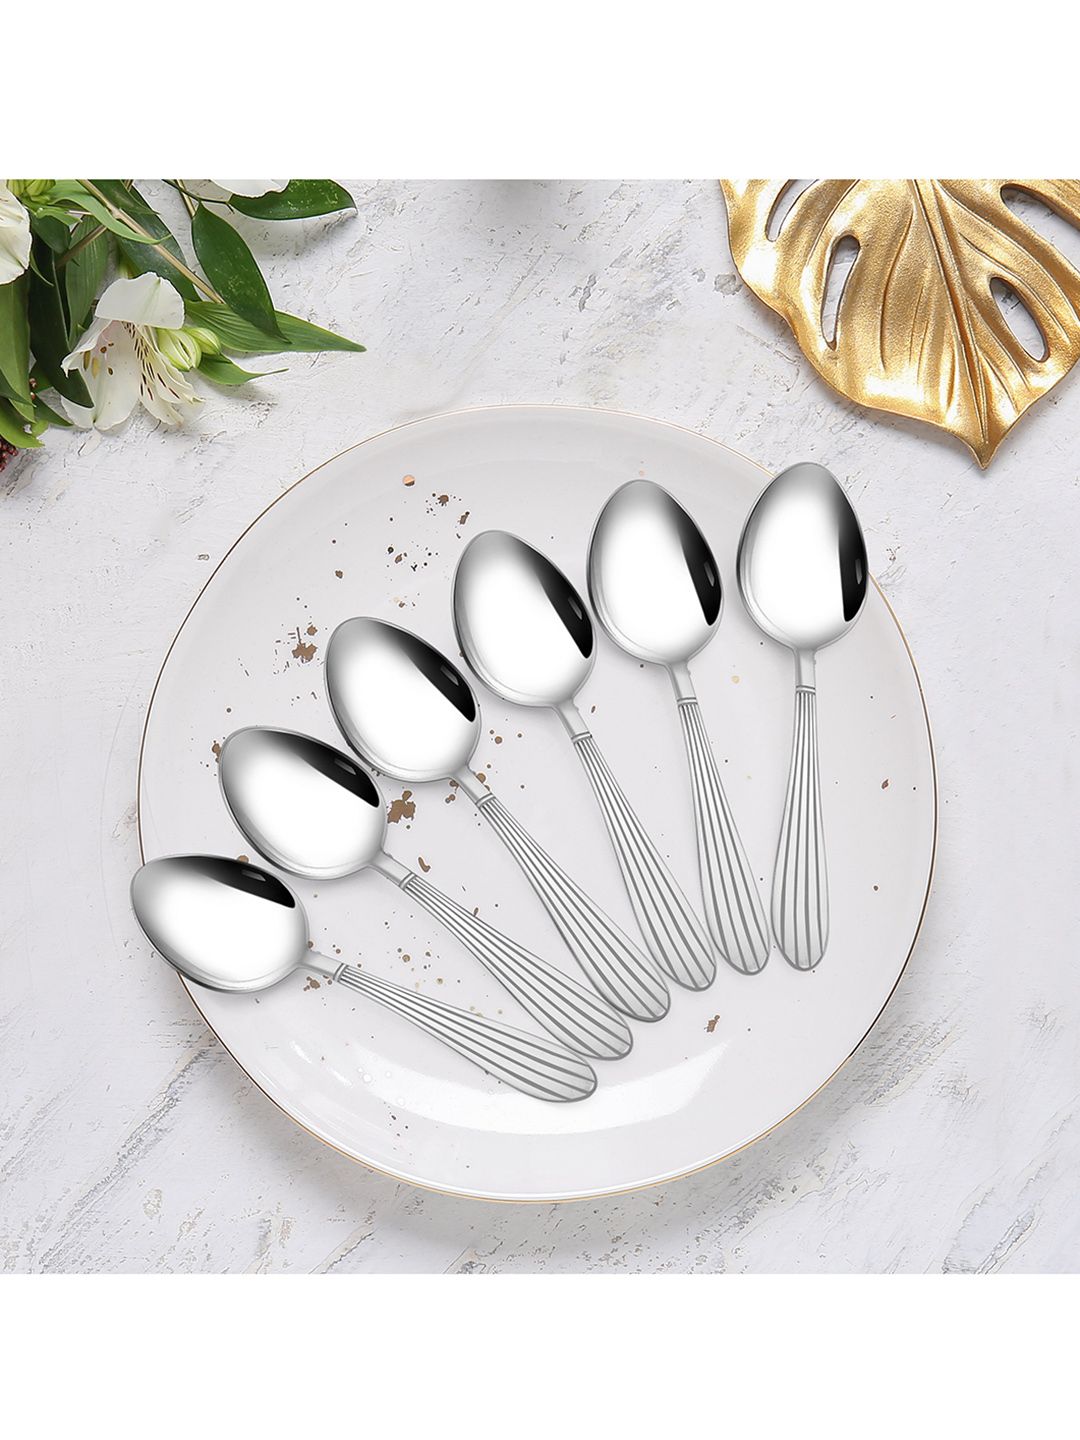 Athome by Nilkamal Set Of 6 Silver-Toned Table Spoons Price in India